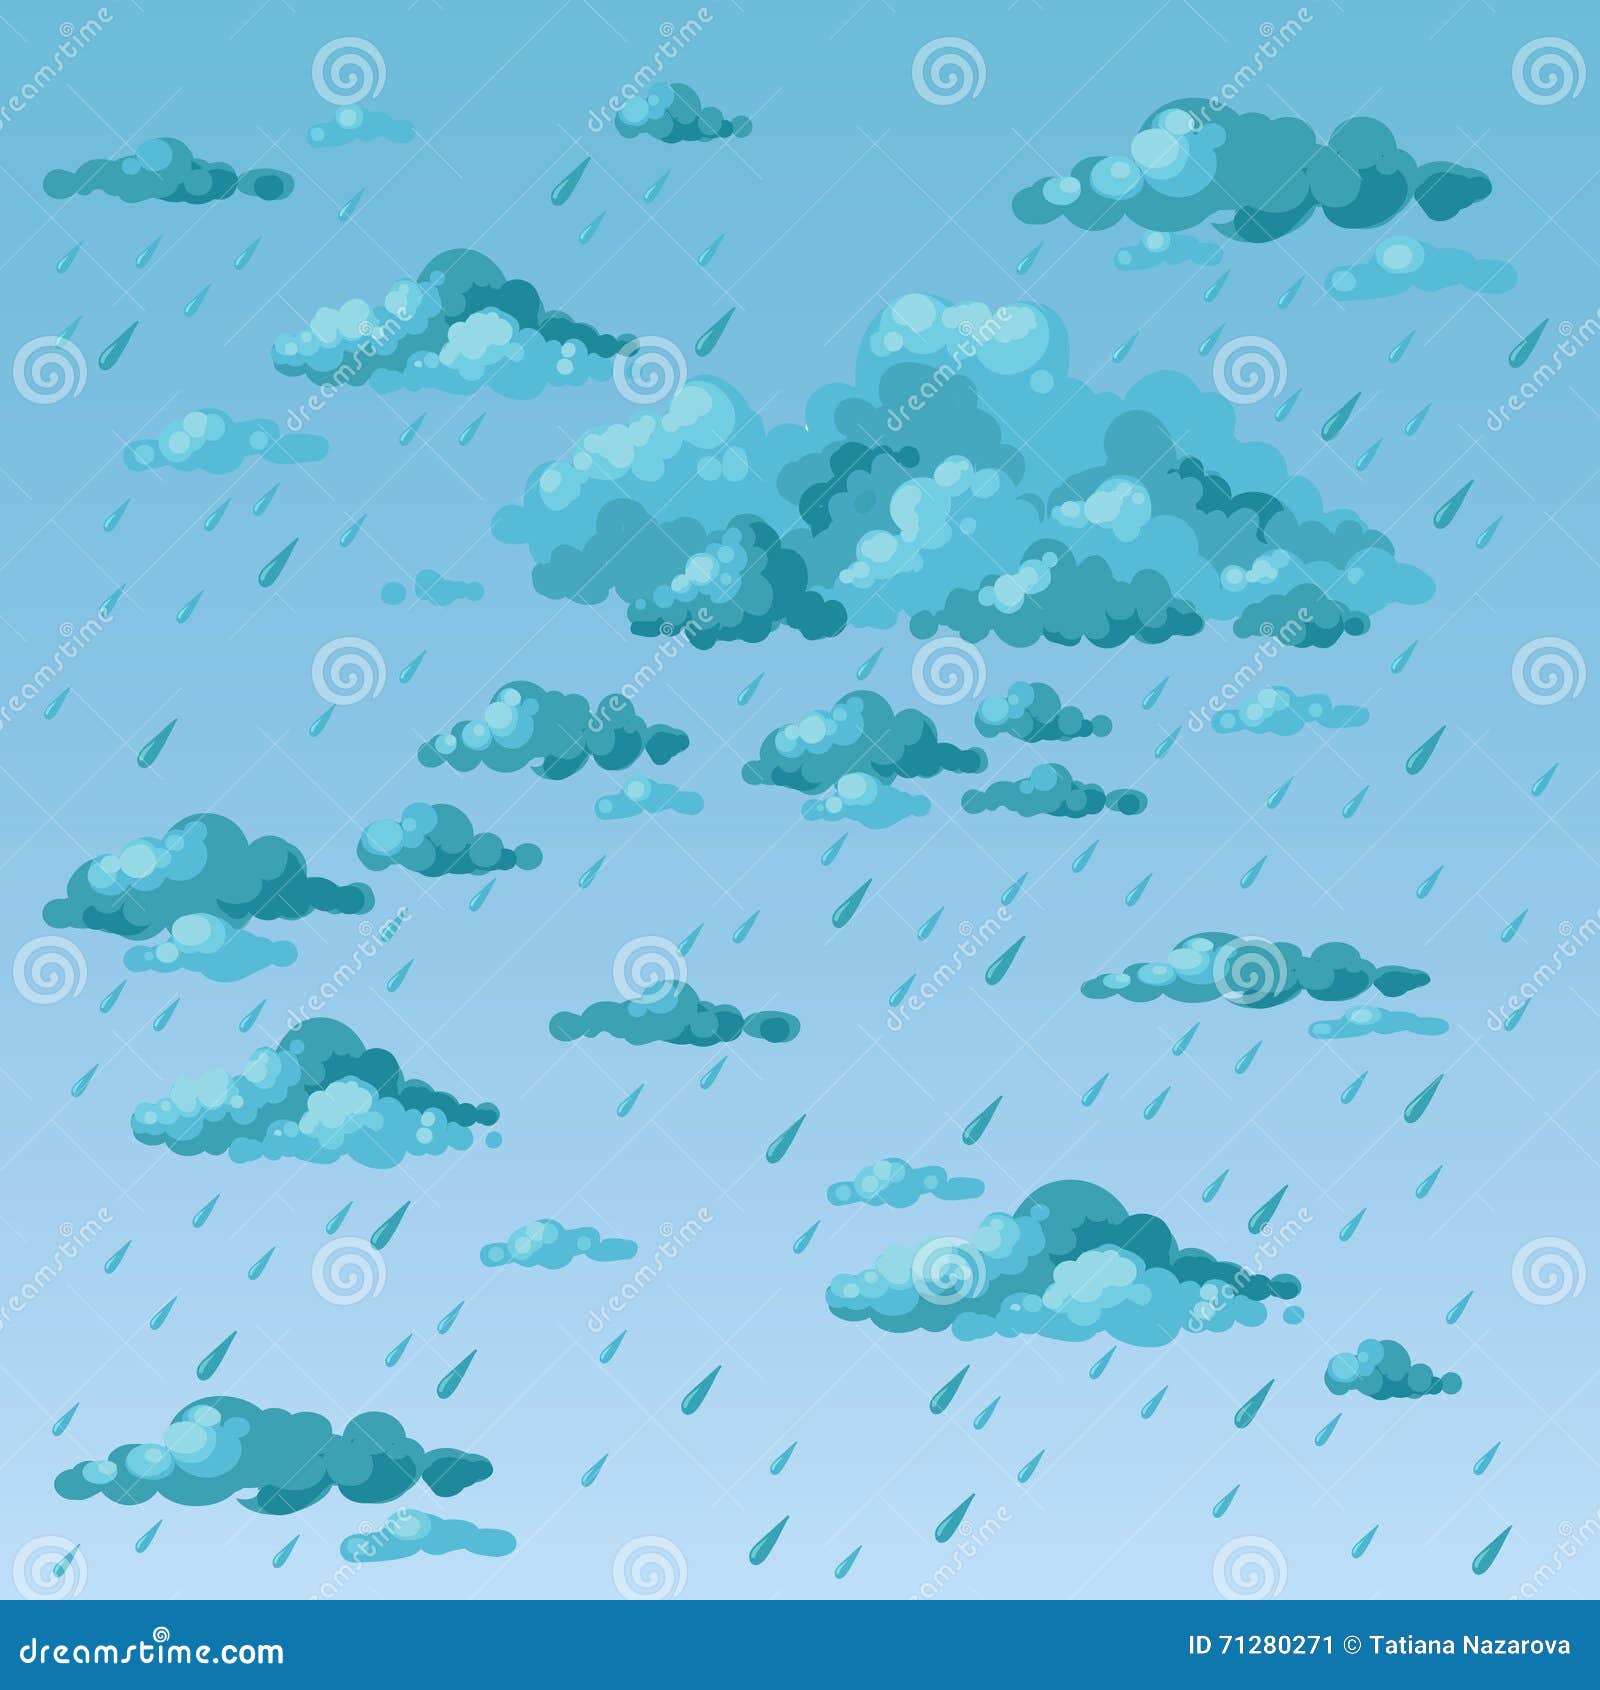 Gloomy Day Cartoons, Illustrations &amp; Vector Stock Images ...